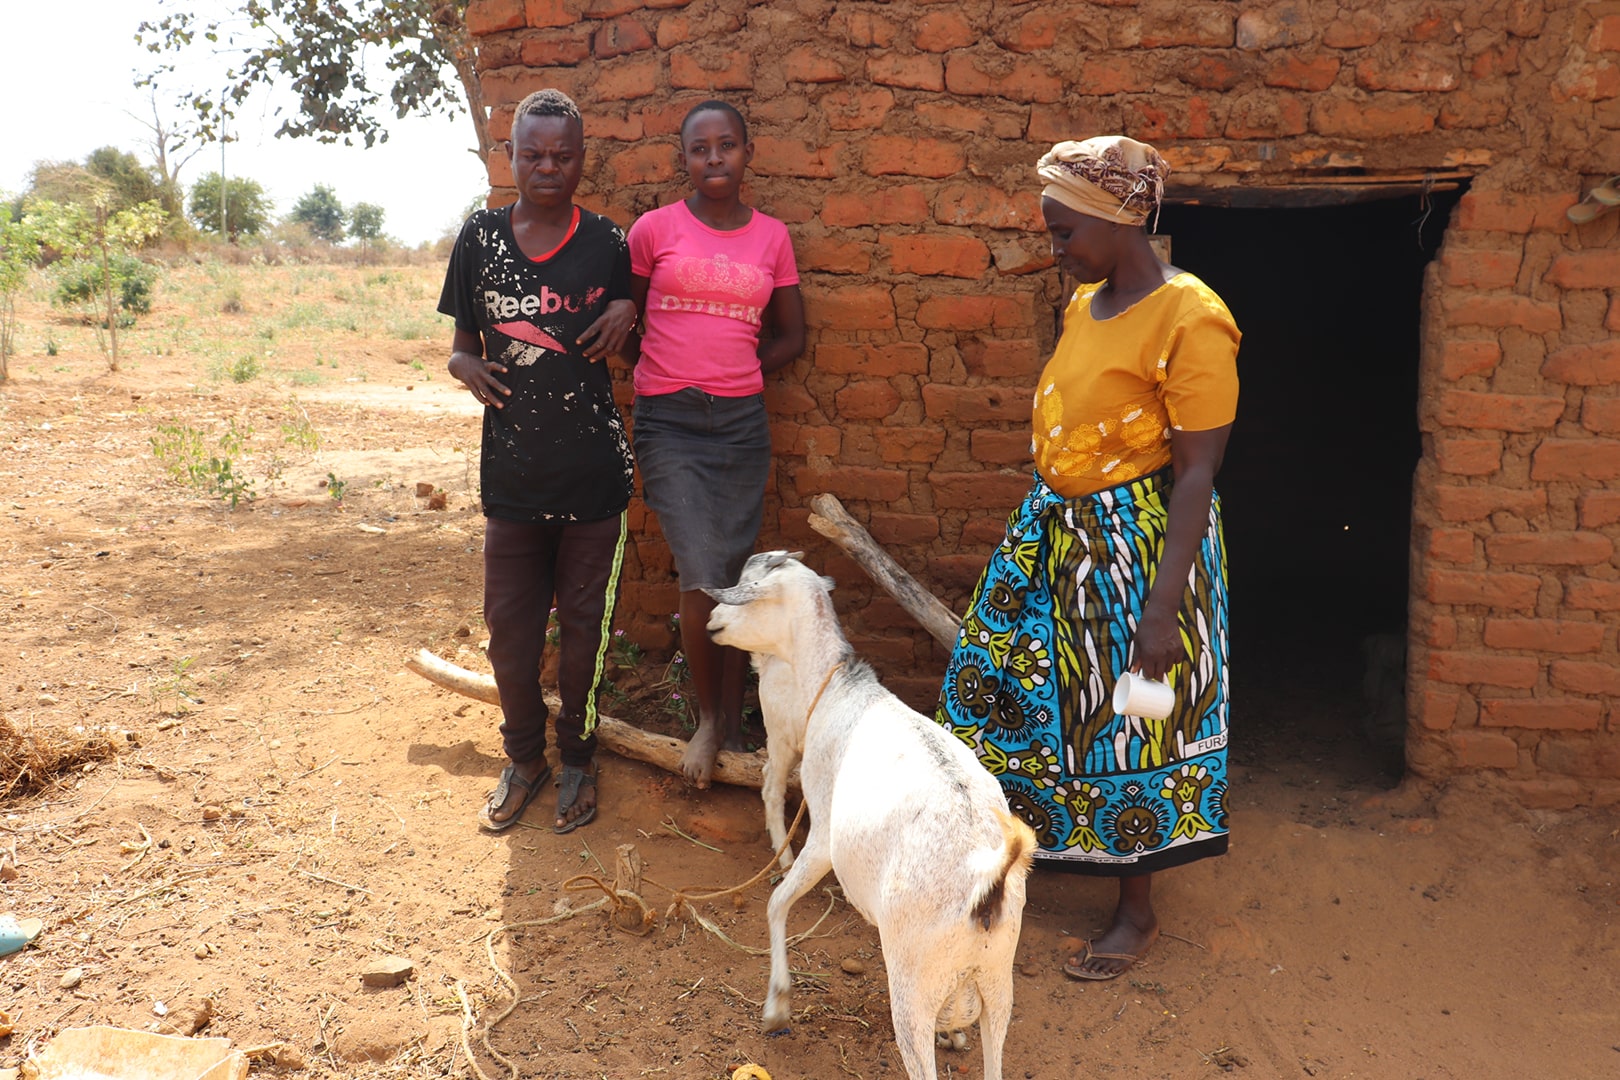 Three people stand in front of a brick hut with a goat